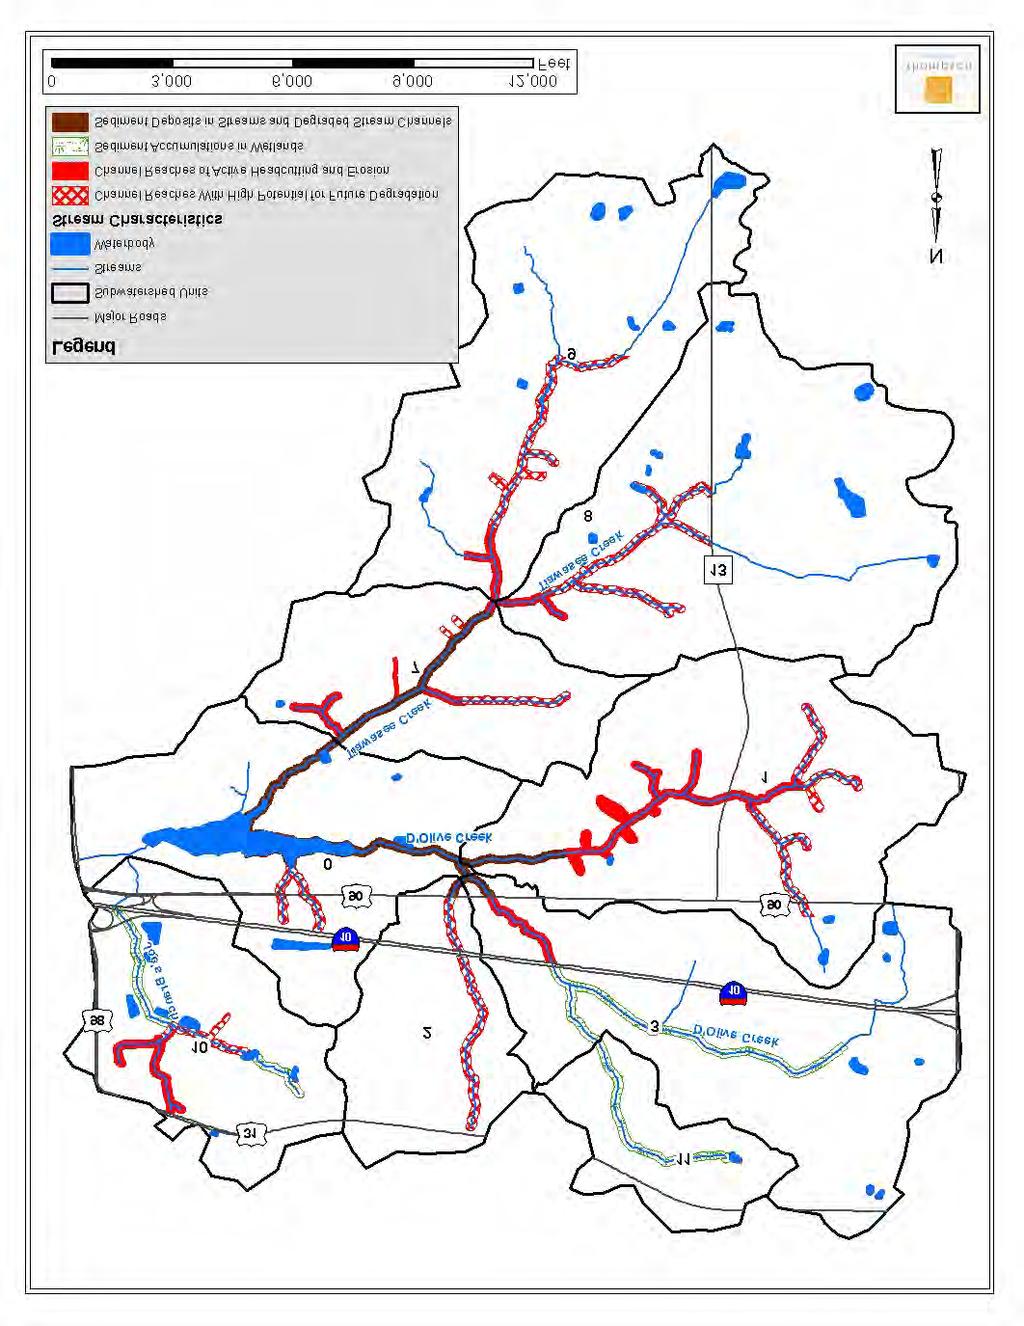 Watershed Management Goals and Objectives Four primary objectives guided the development of the conceptual measures addressed in the WMP: Reduce upstream sediment inputs into the Lake Forest Lake/D